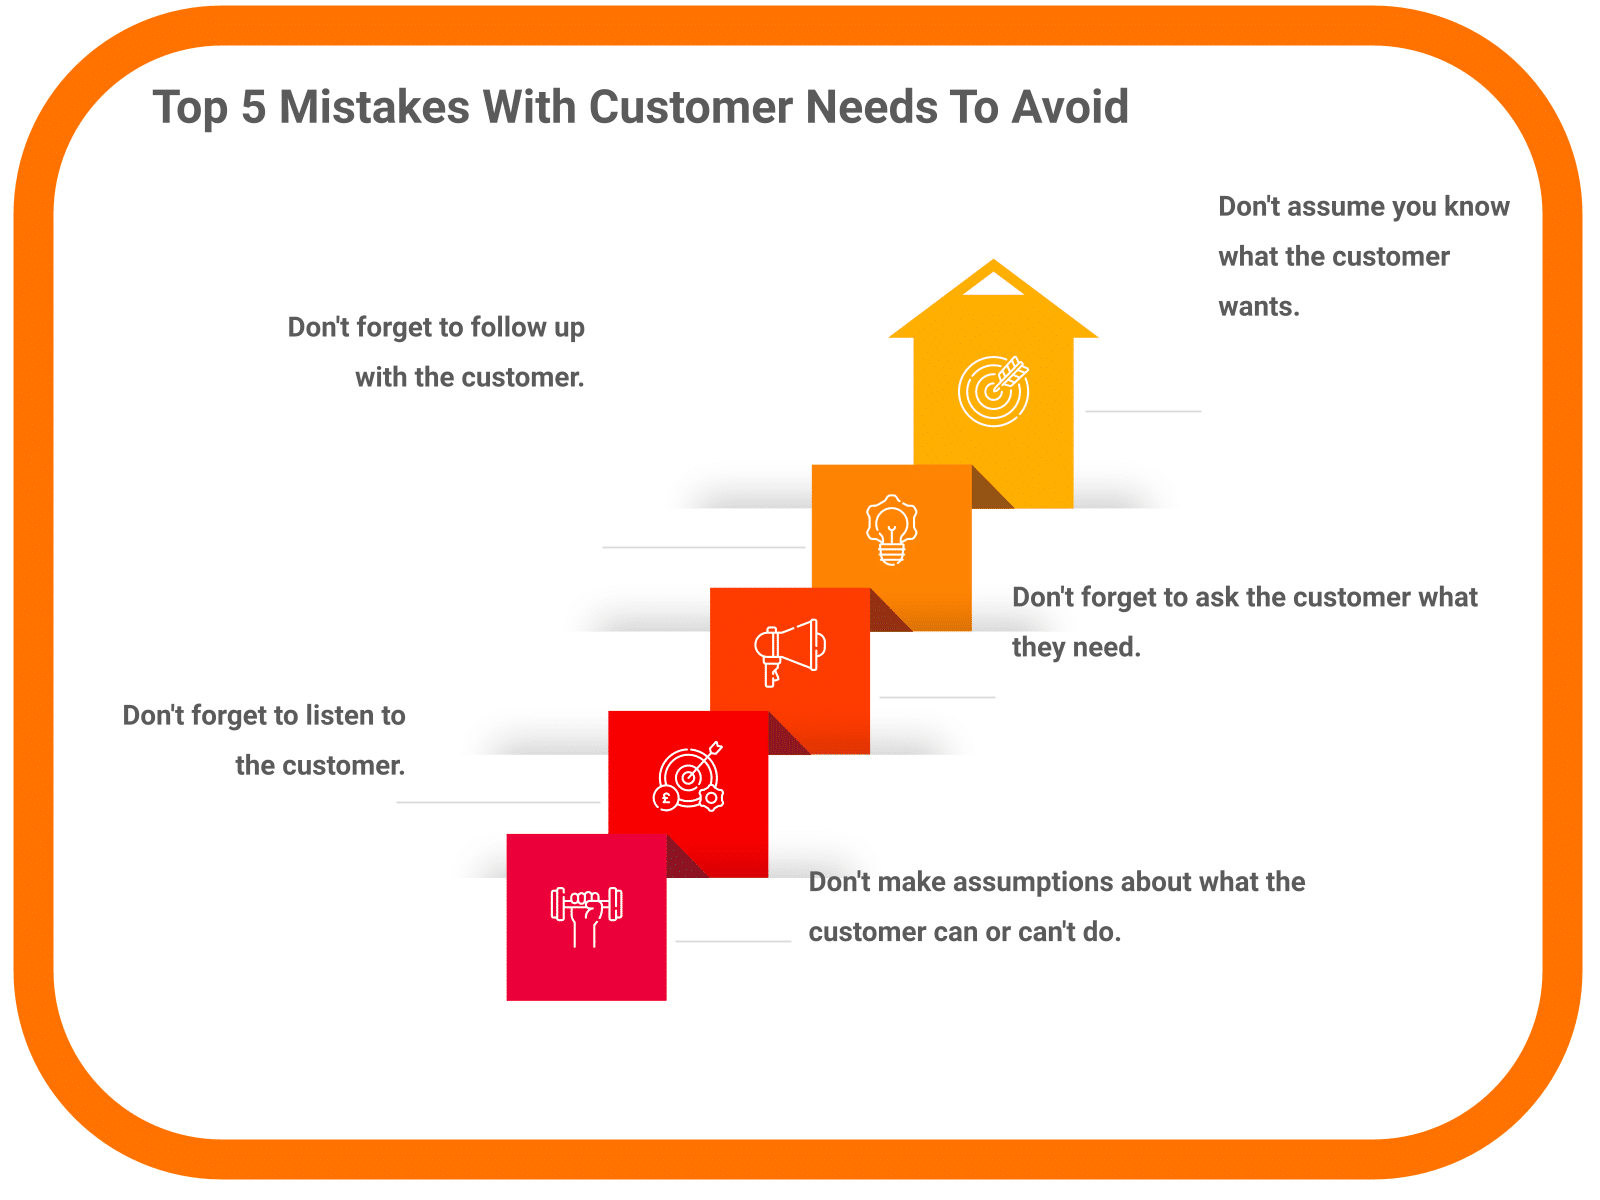 Top 5 Mistakes With Customer Needs To Avoid